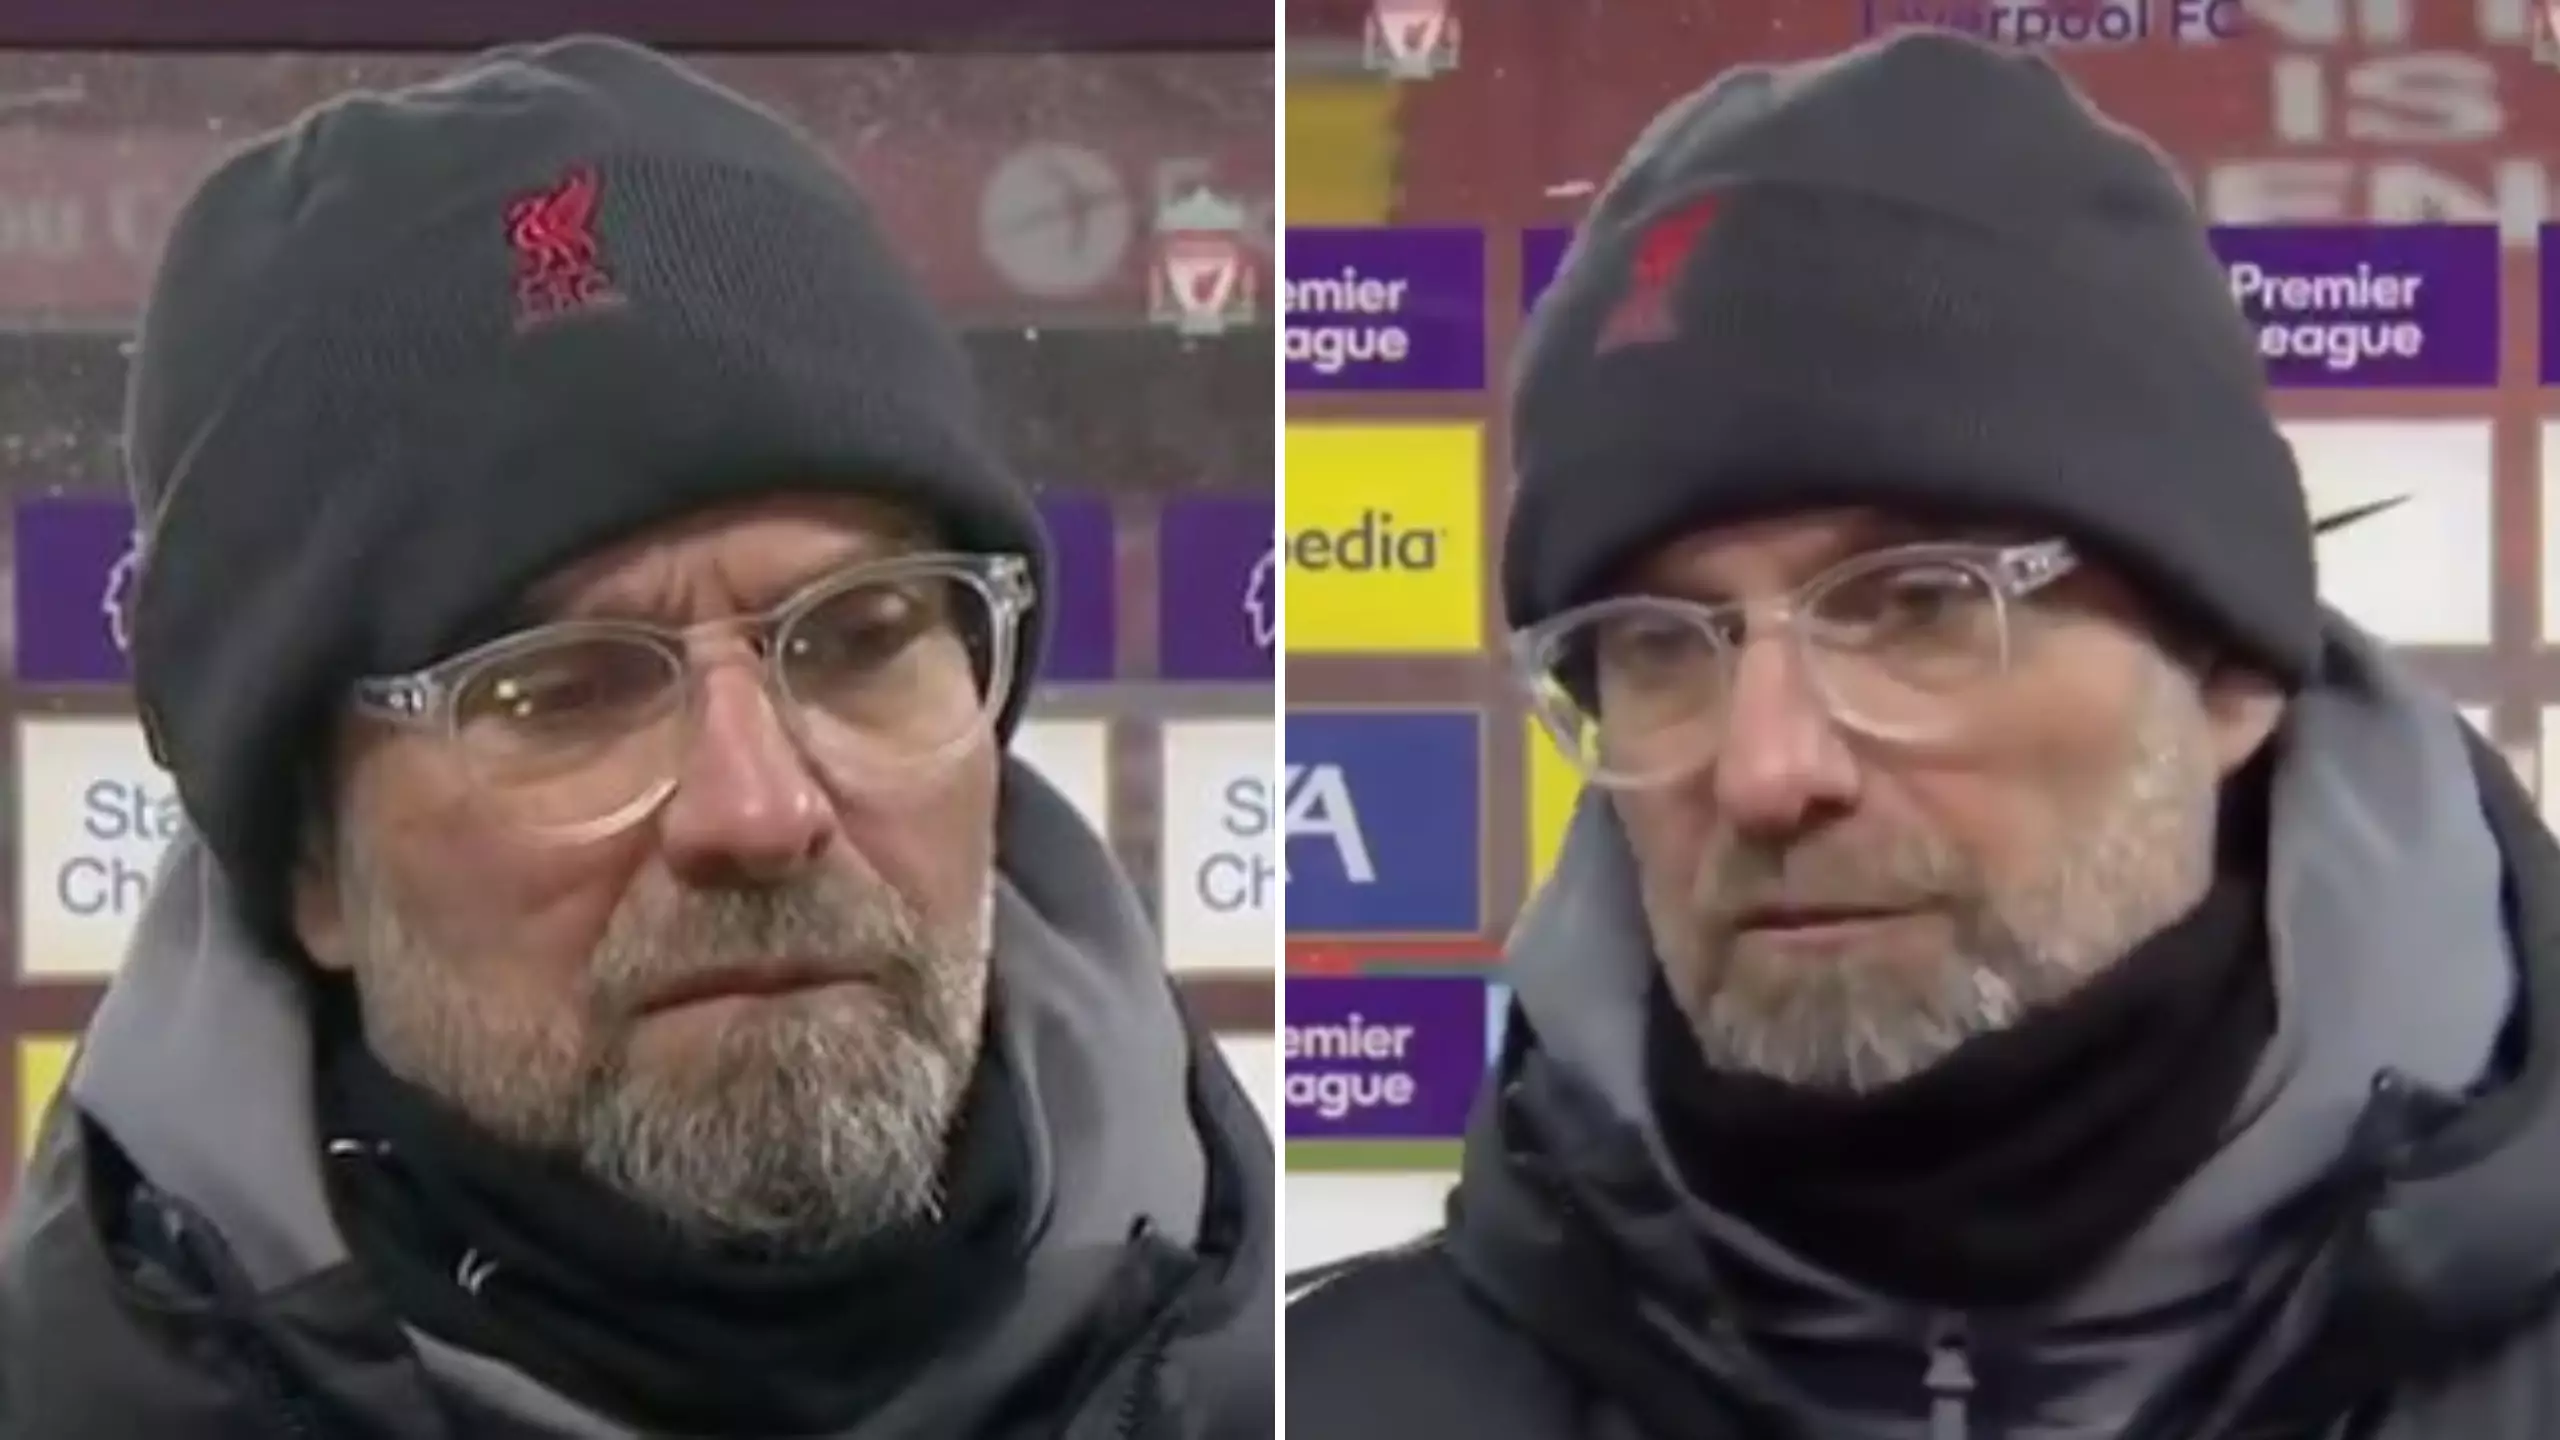 Jurgen Klopp's Interview With Geoff Shreeves Following Liverpool 1-4 Man City Was Incredibly Awkward